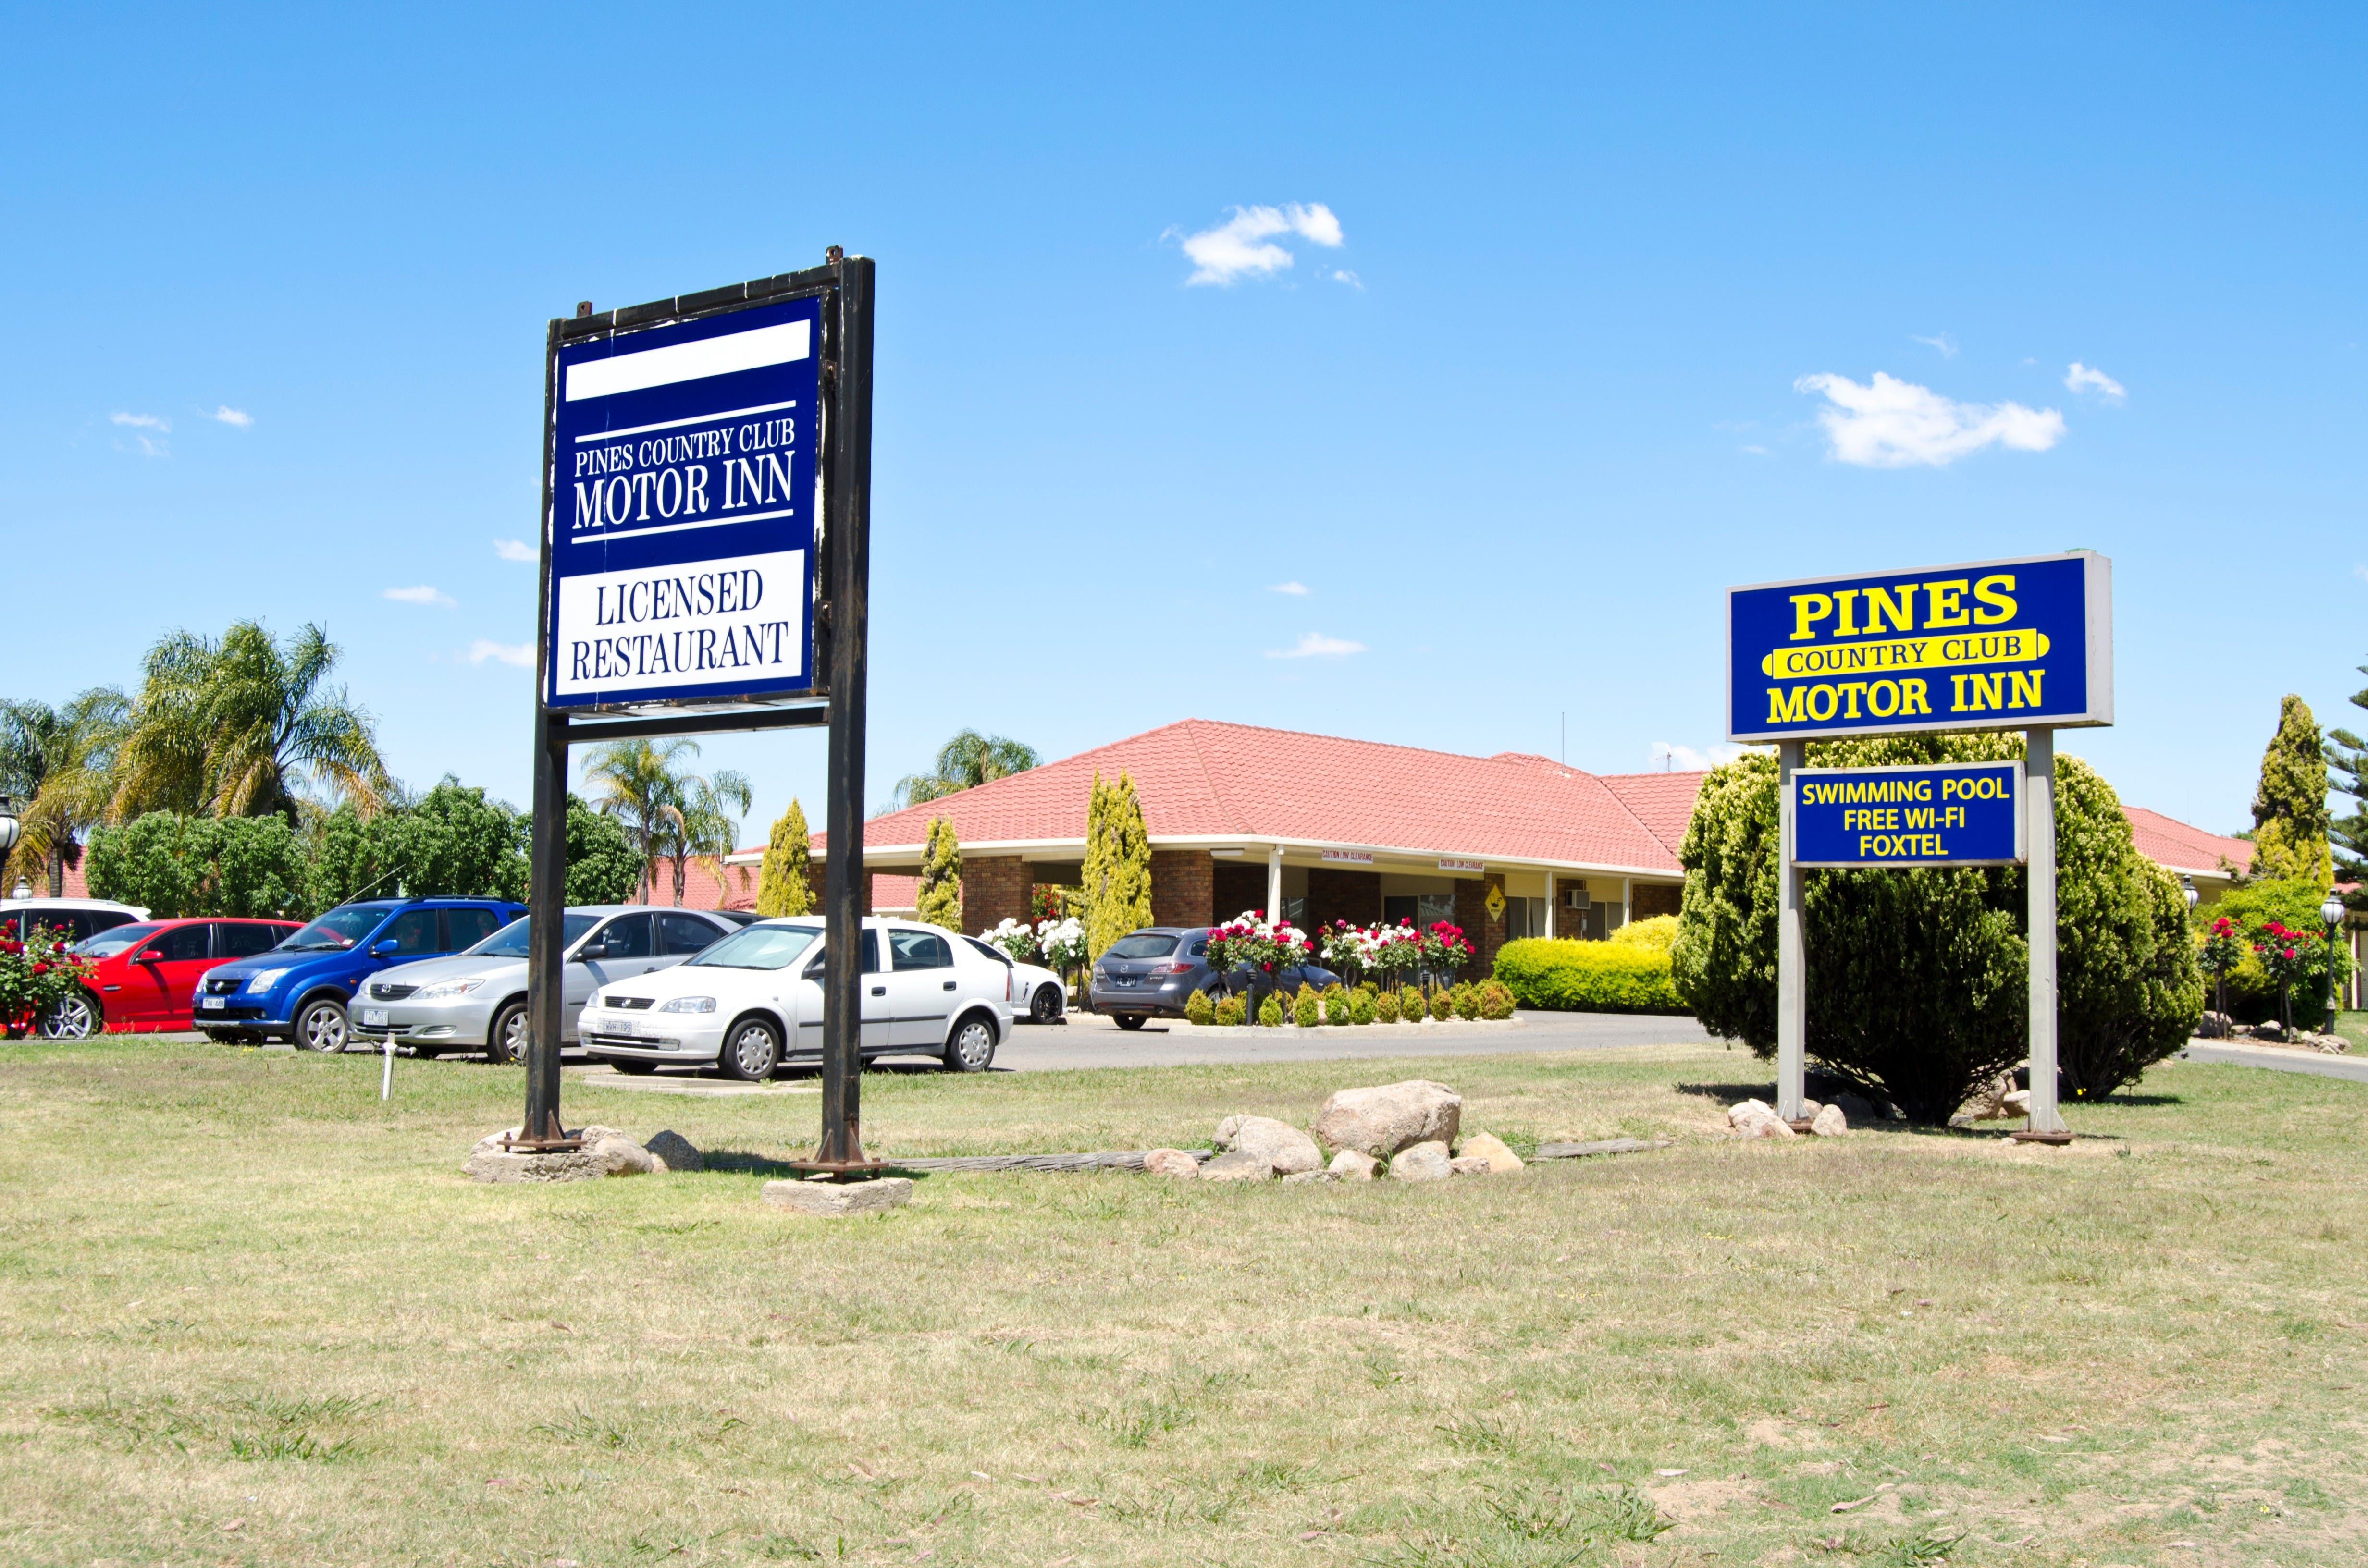 Pines Country Club Motor Inn - Accommodation Nelson Bay